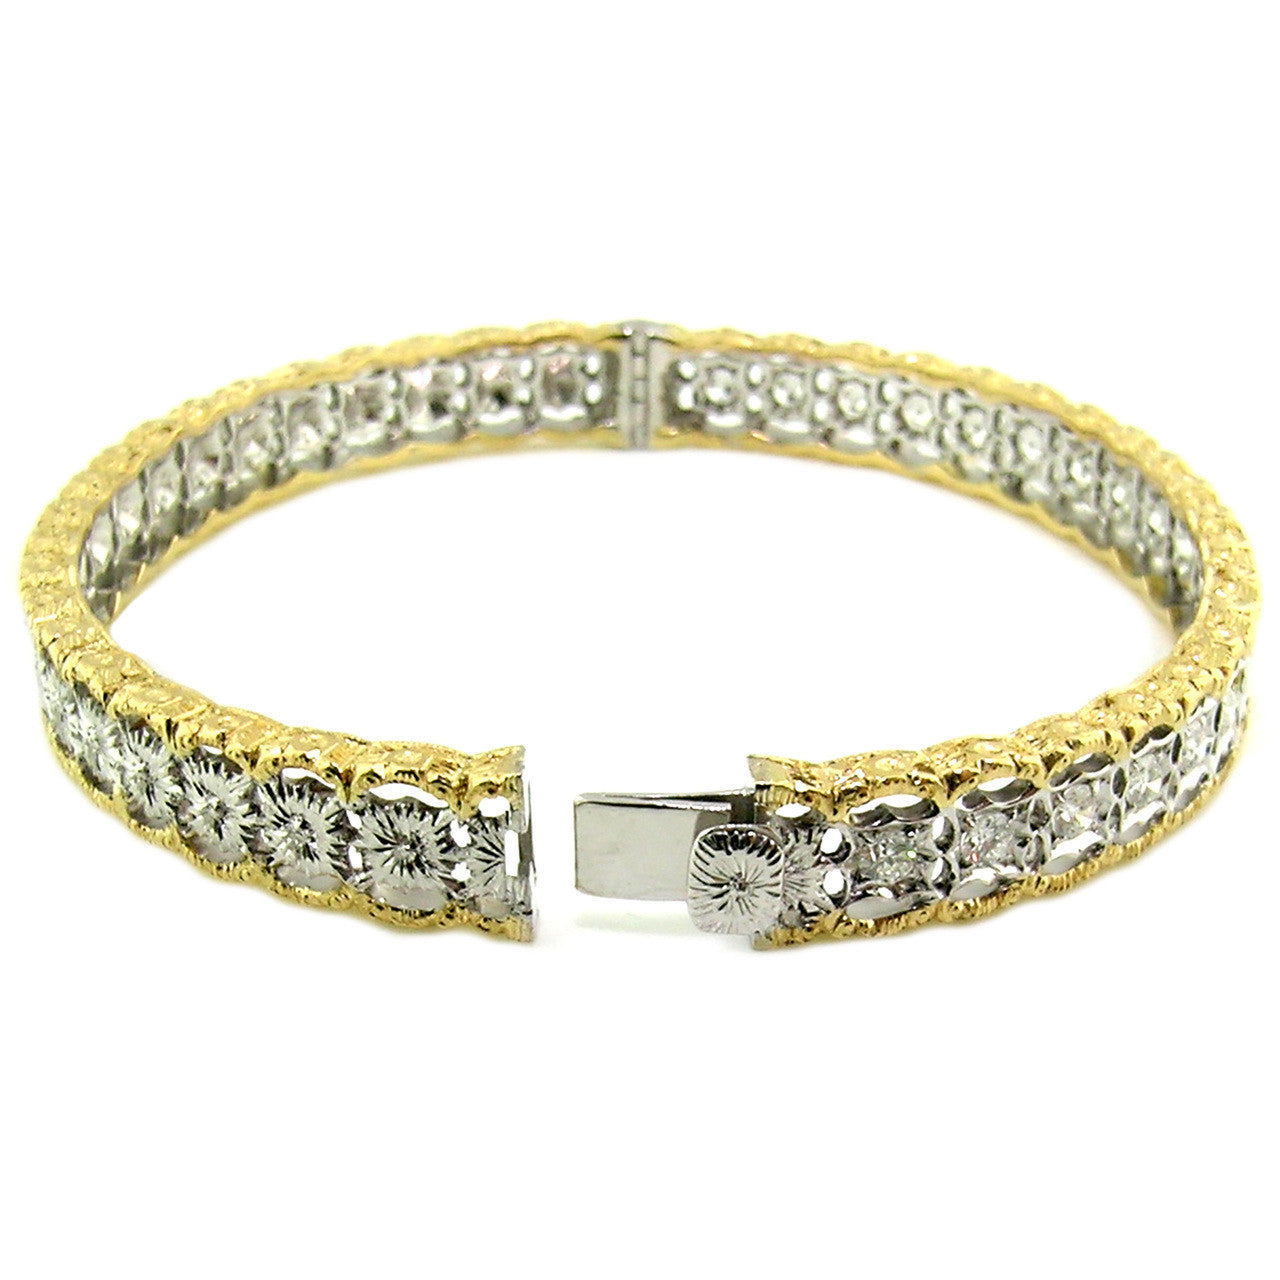 Stefania Florentine Engraved Diamond 18kt Bangle made in Italy for Cynthia Scott Jewelry